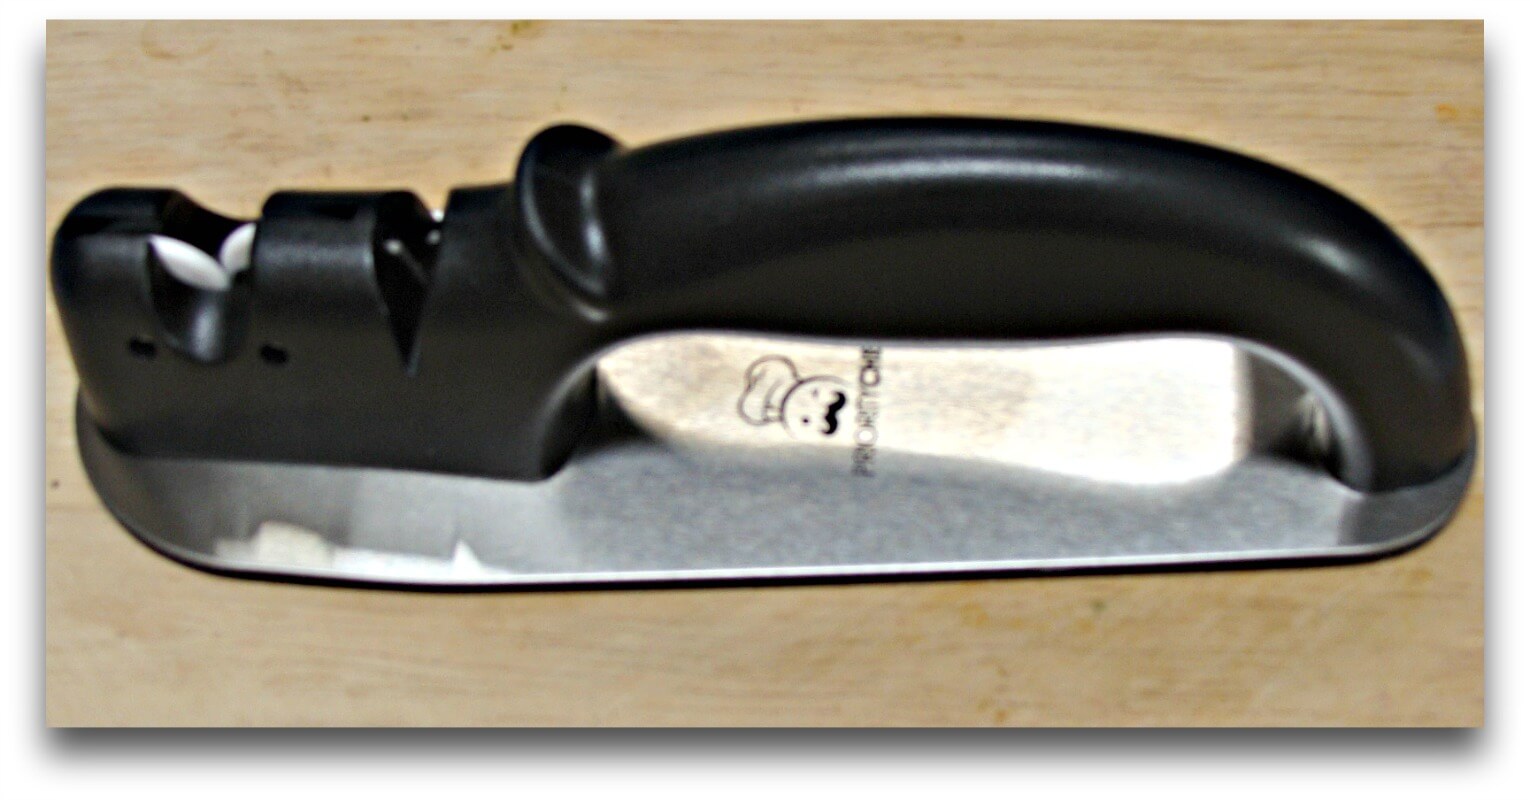 Priority Chef Precision Knife Sharpener Review - Jaxsology